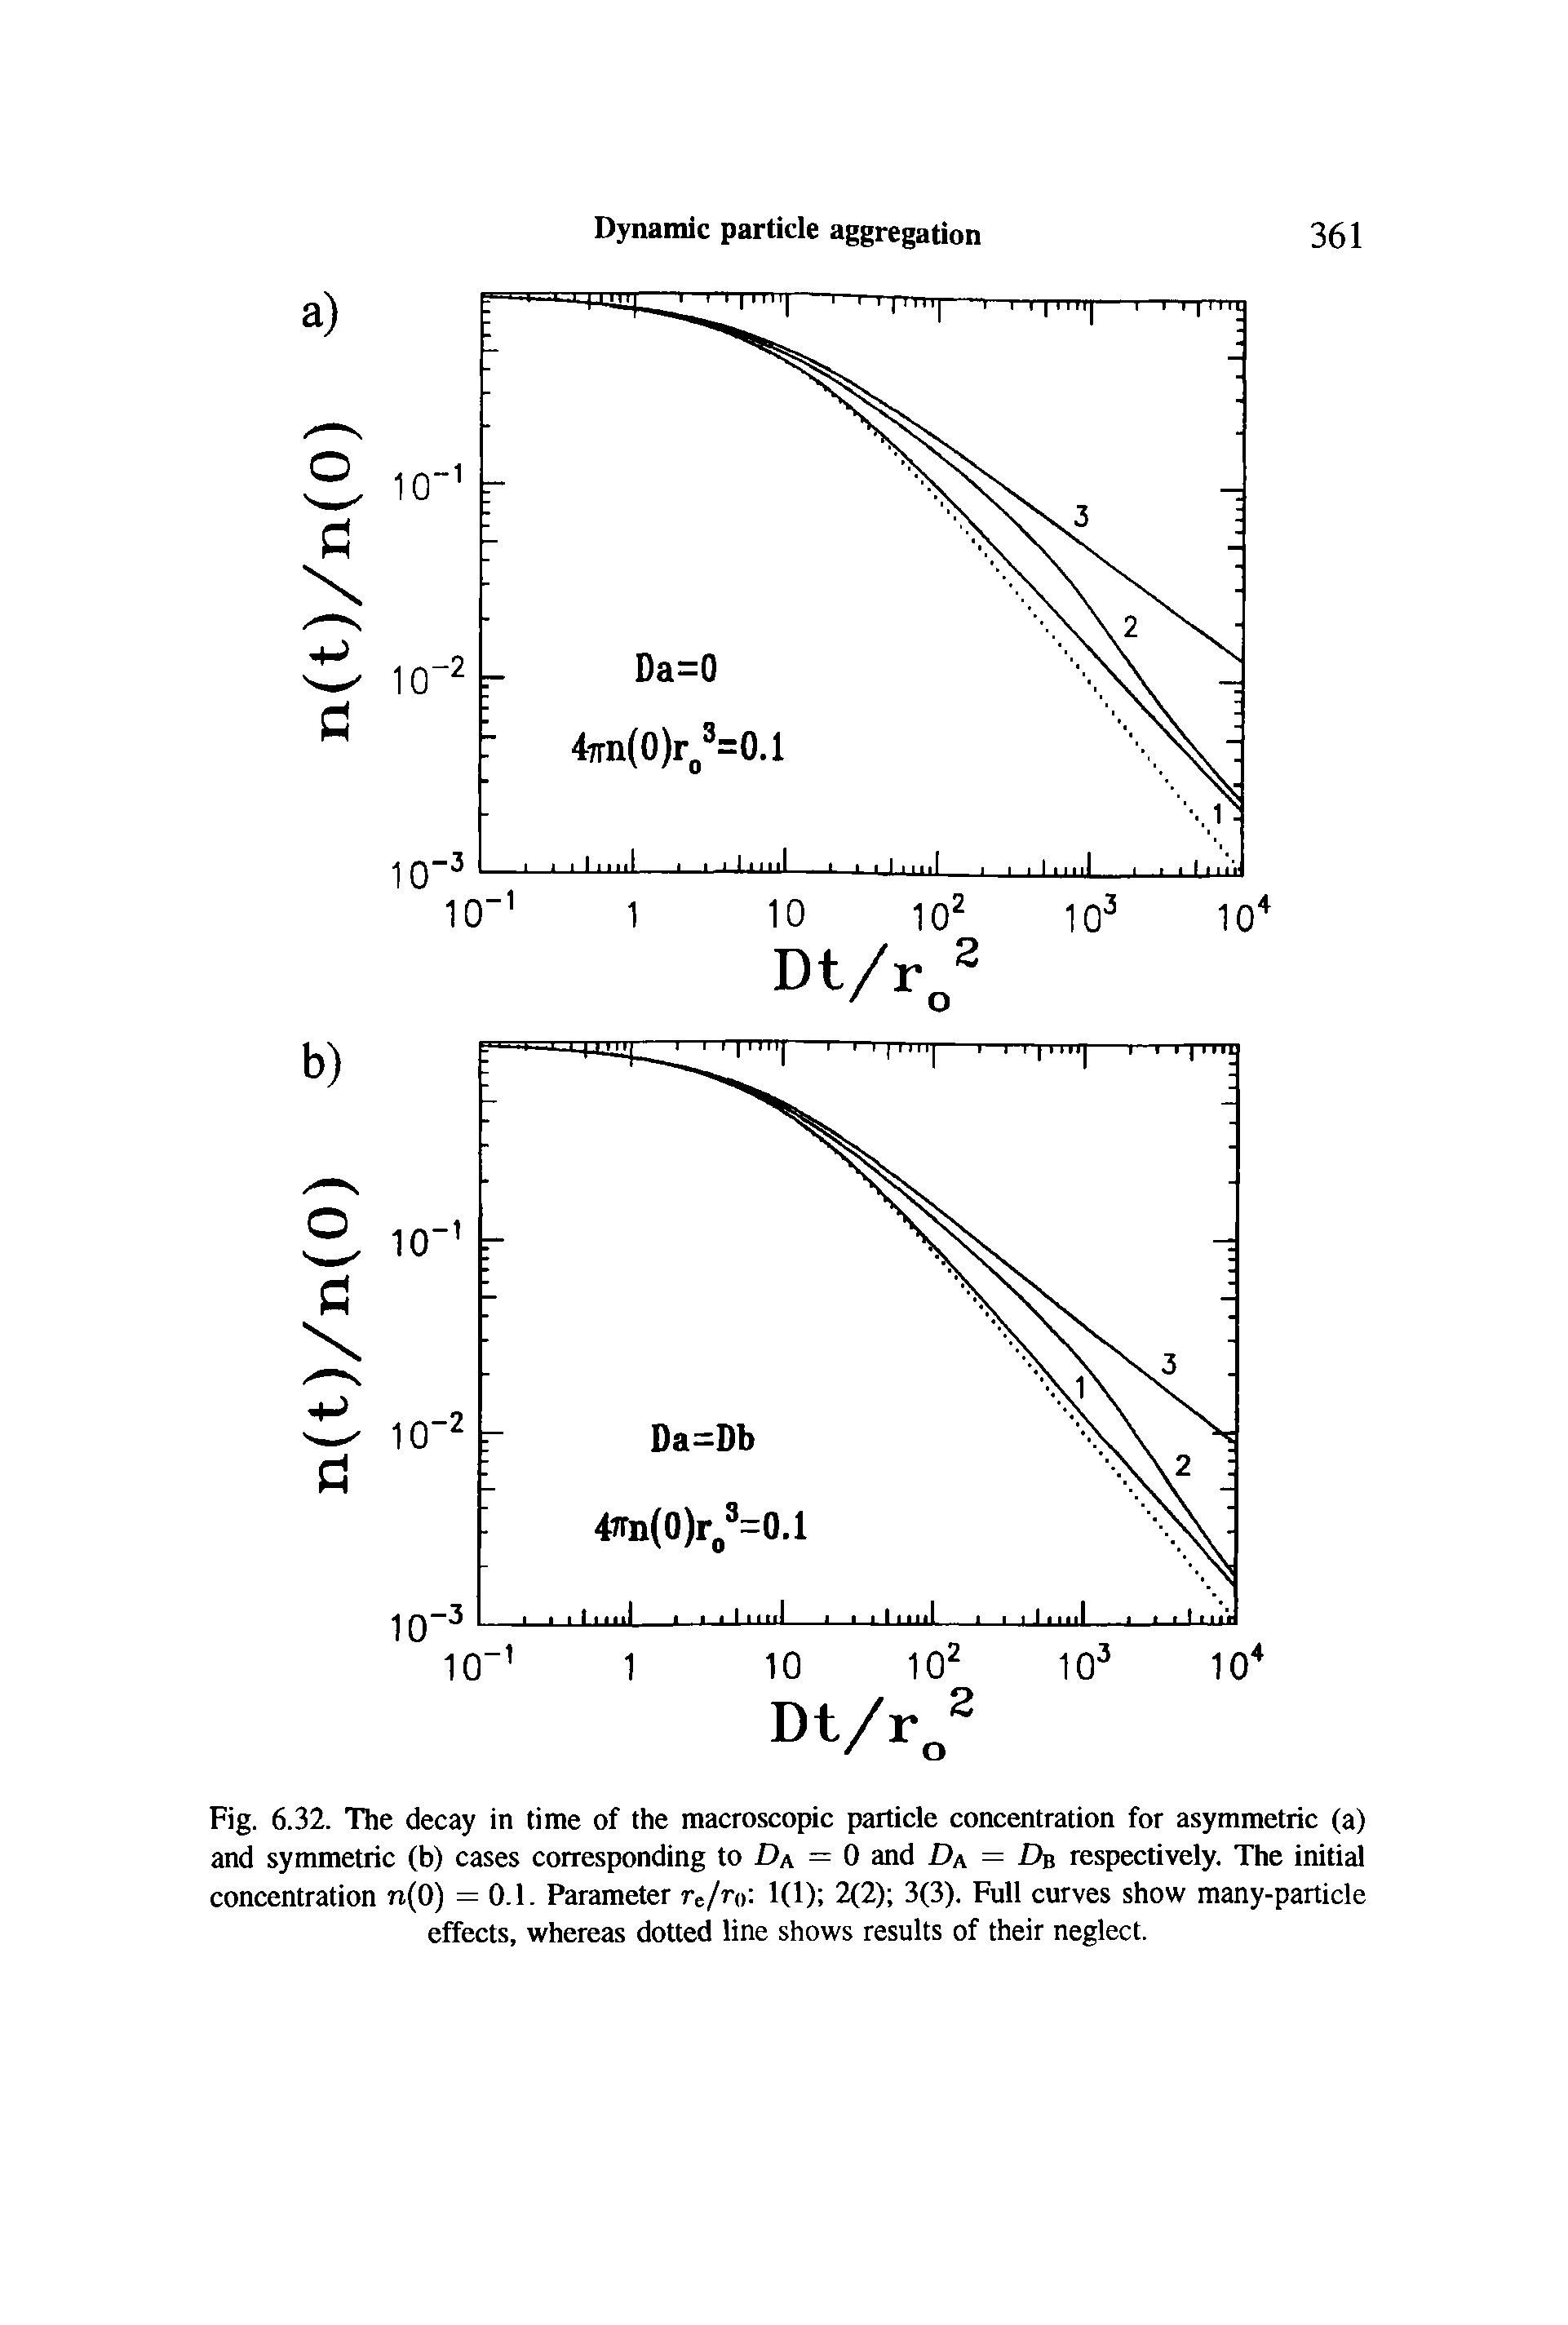 Fig. 6.32. The decay in time of the macroscopic particle concentration for asymmetric (a) and symmetric (b) cases corresponding to >a = 0 and Da = Dr respectively. The initial concentration n(0) =0.1. Parameter rc/r 1(1) 2(2) 3(3). Full curves show many-particle effects, whereas dotted line shows results of their neglect.